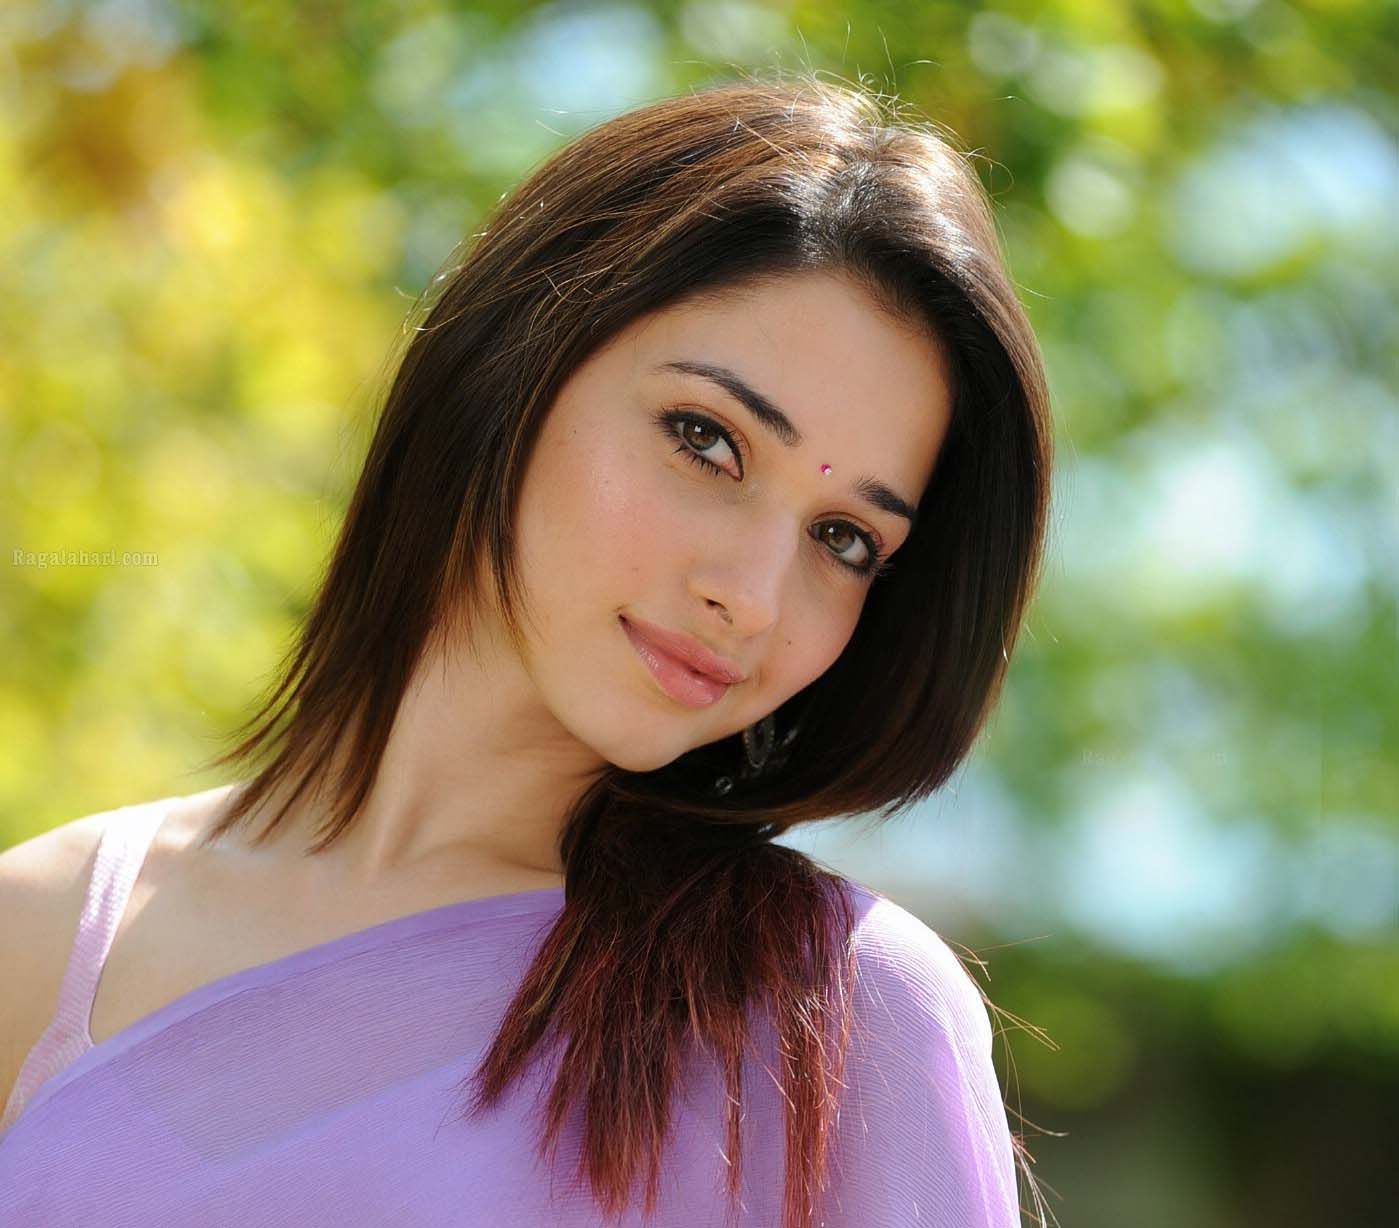 Tamannaah Bhatia Backgrounds, Compatible - PC, Mobile, Gadgets| 1399x1228 px